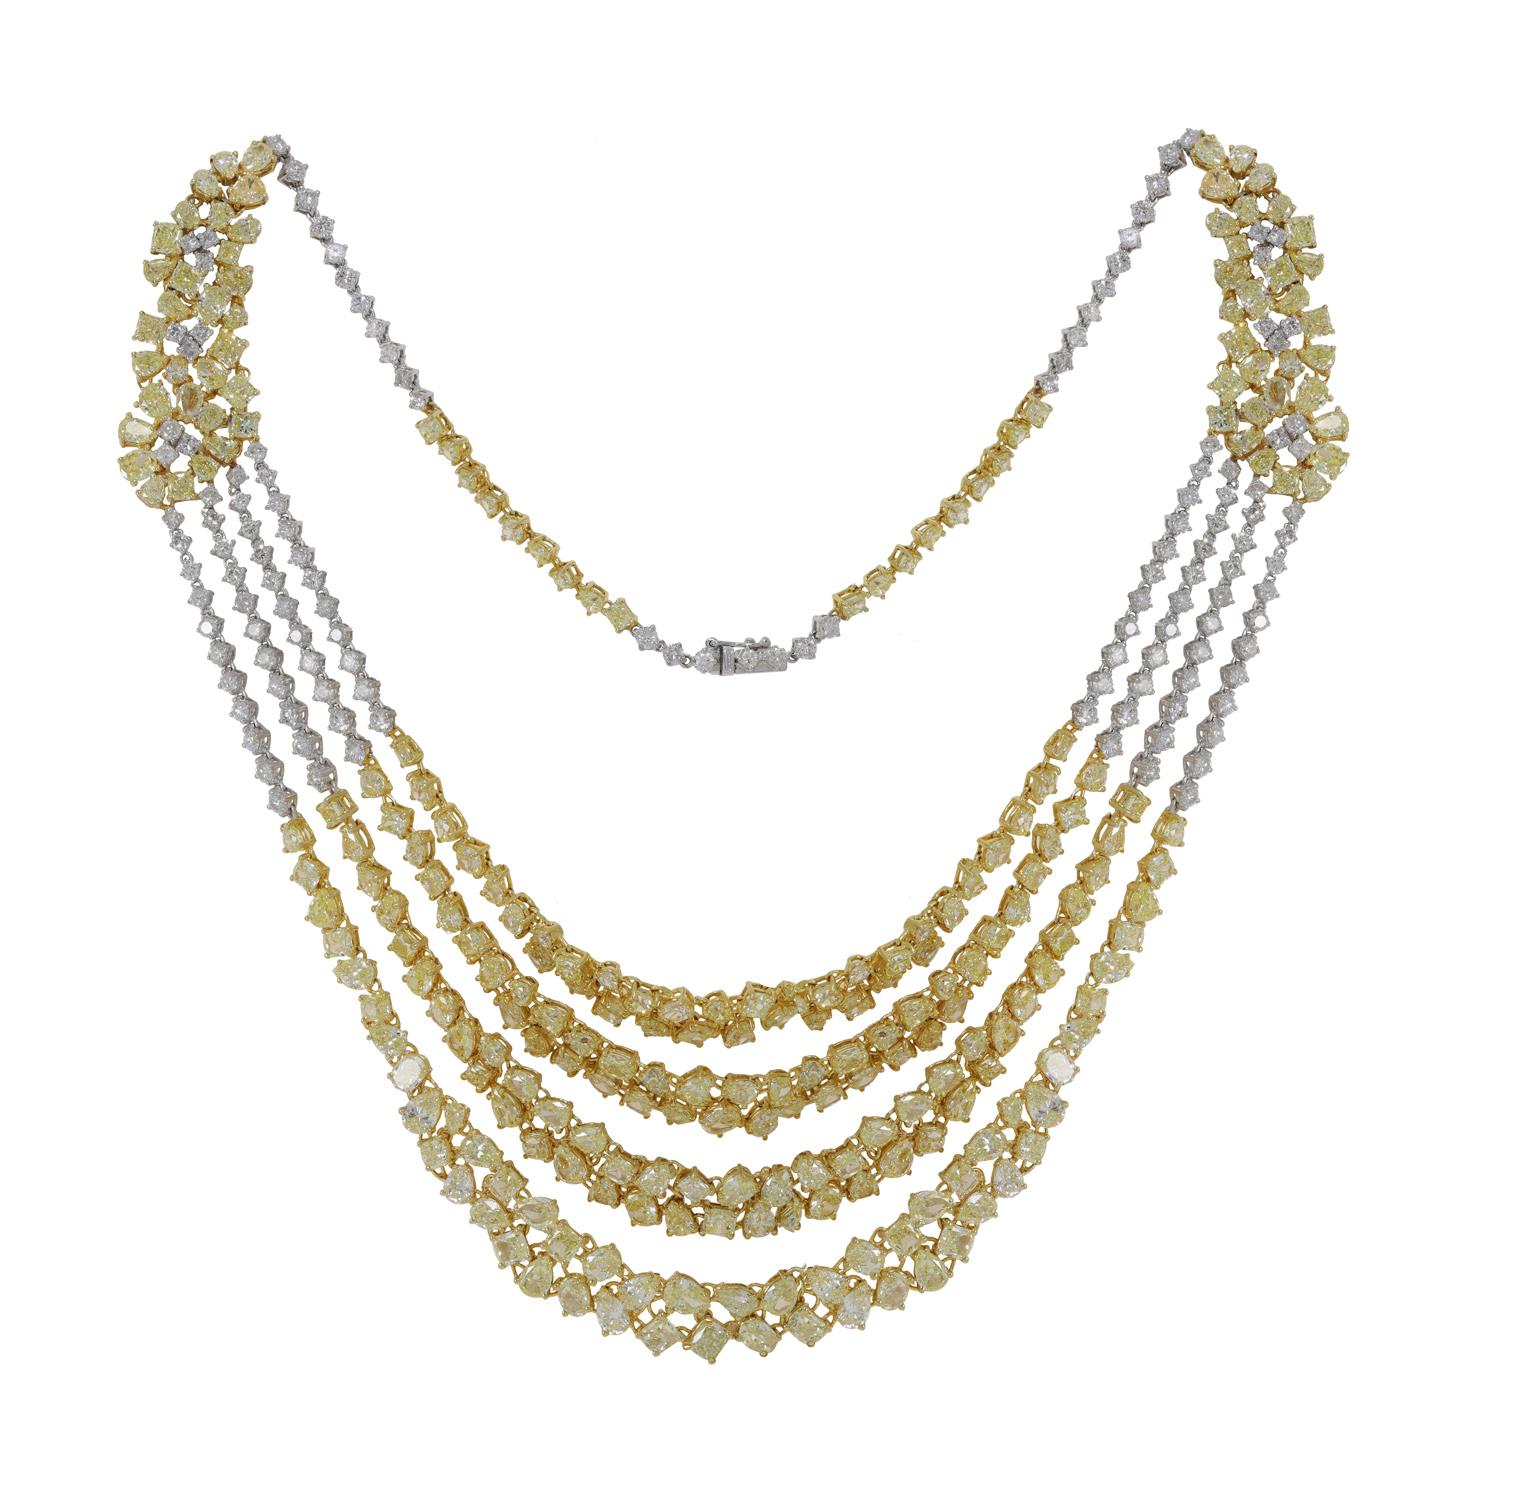 Modern Diana M. Fancy Yellow Diamond Necklace Feturing 49.73ct of diamond cascading  For Sale